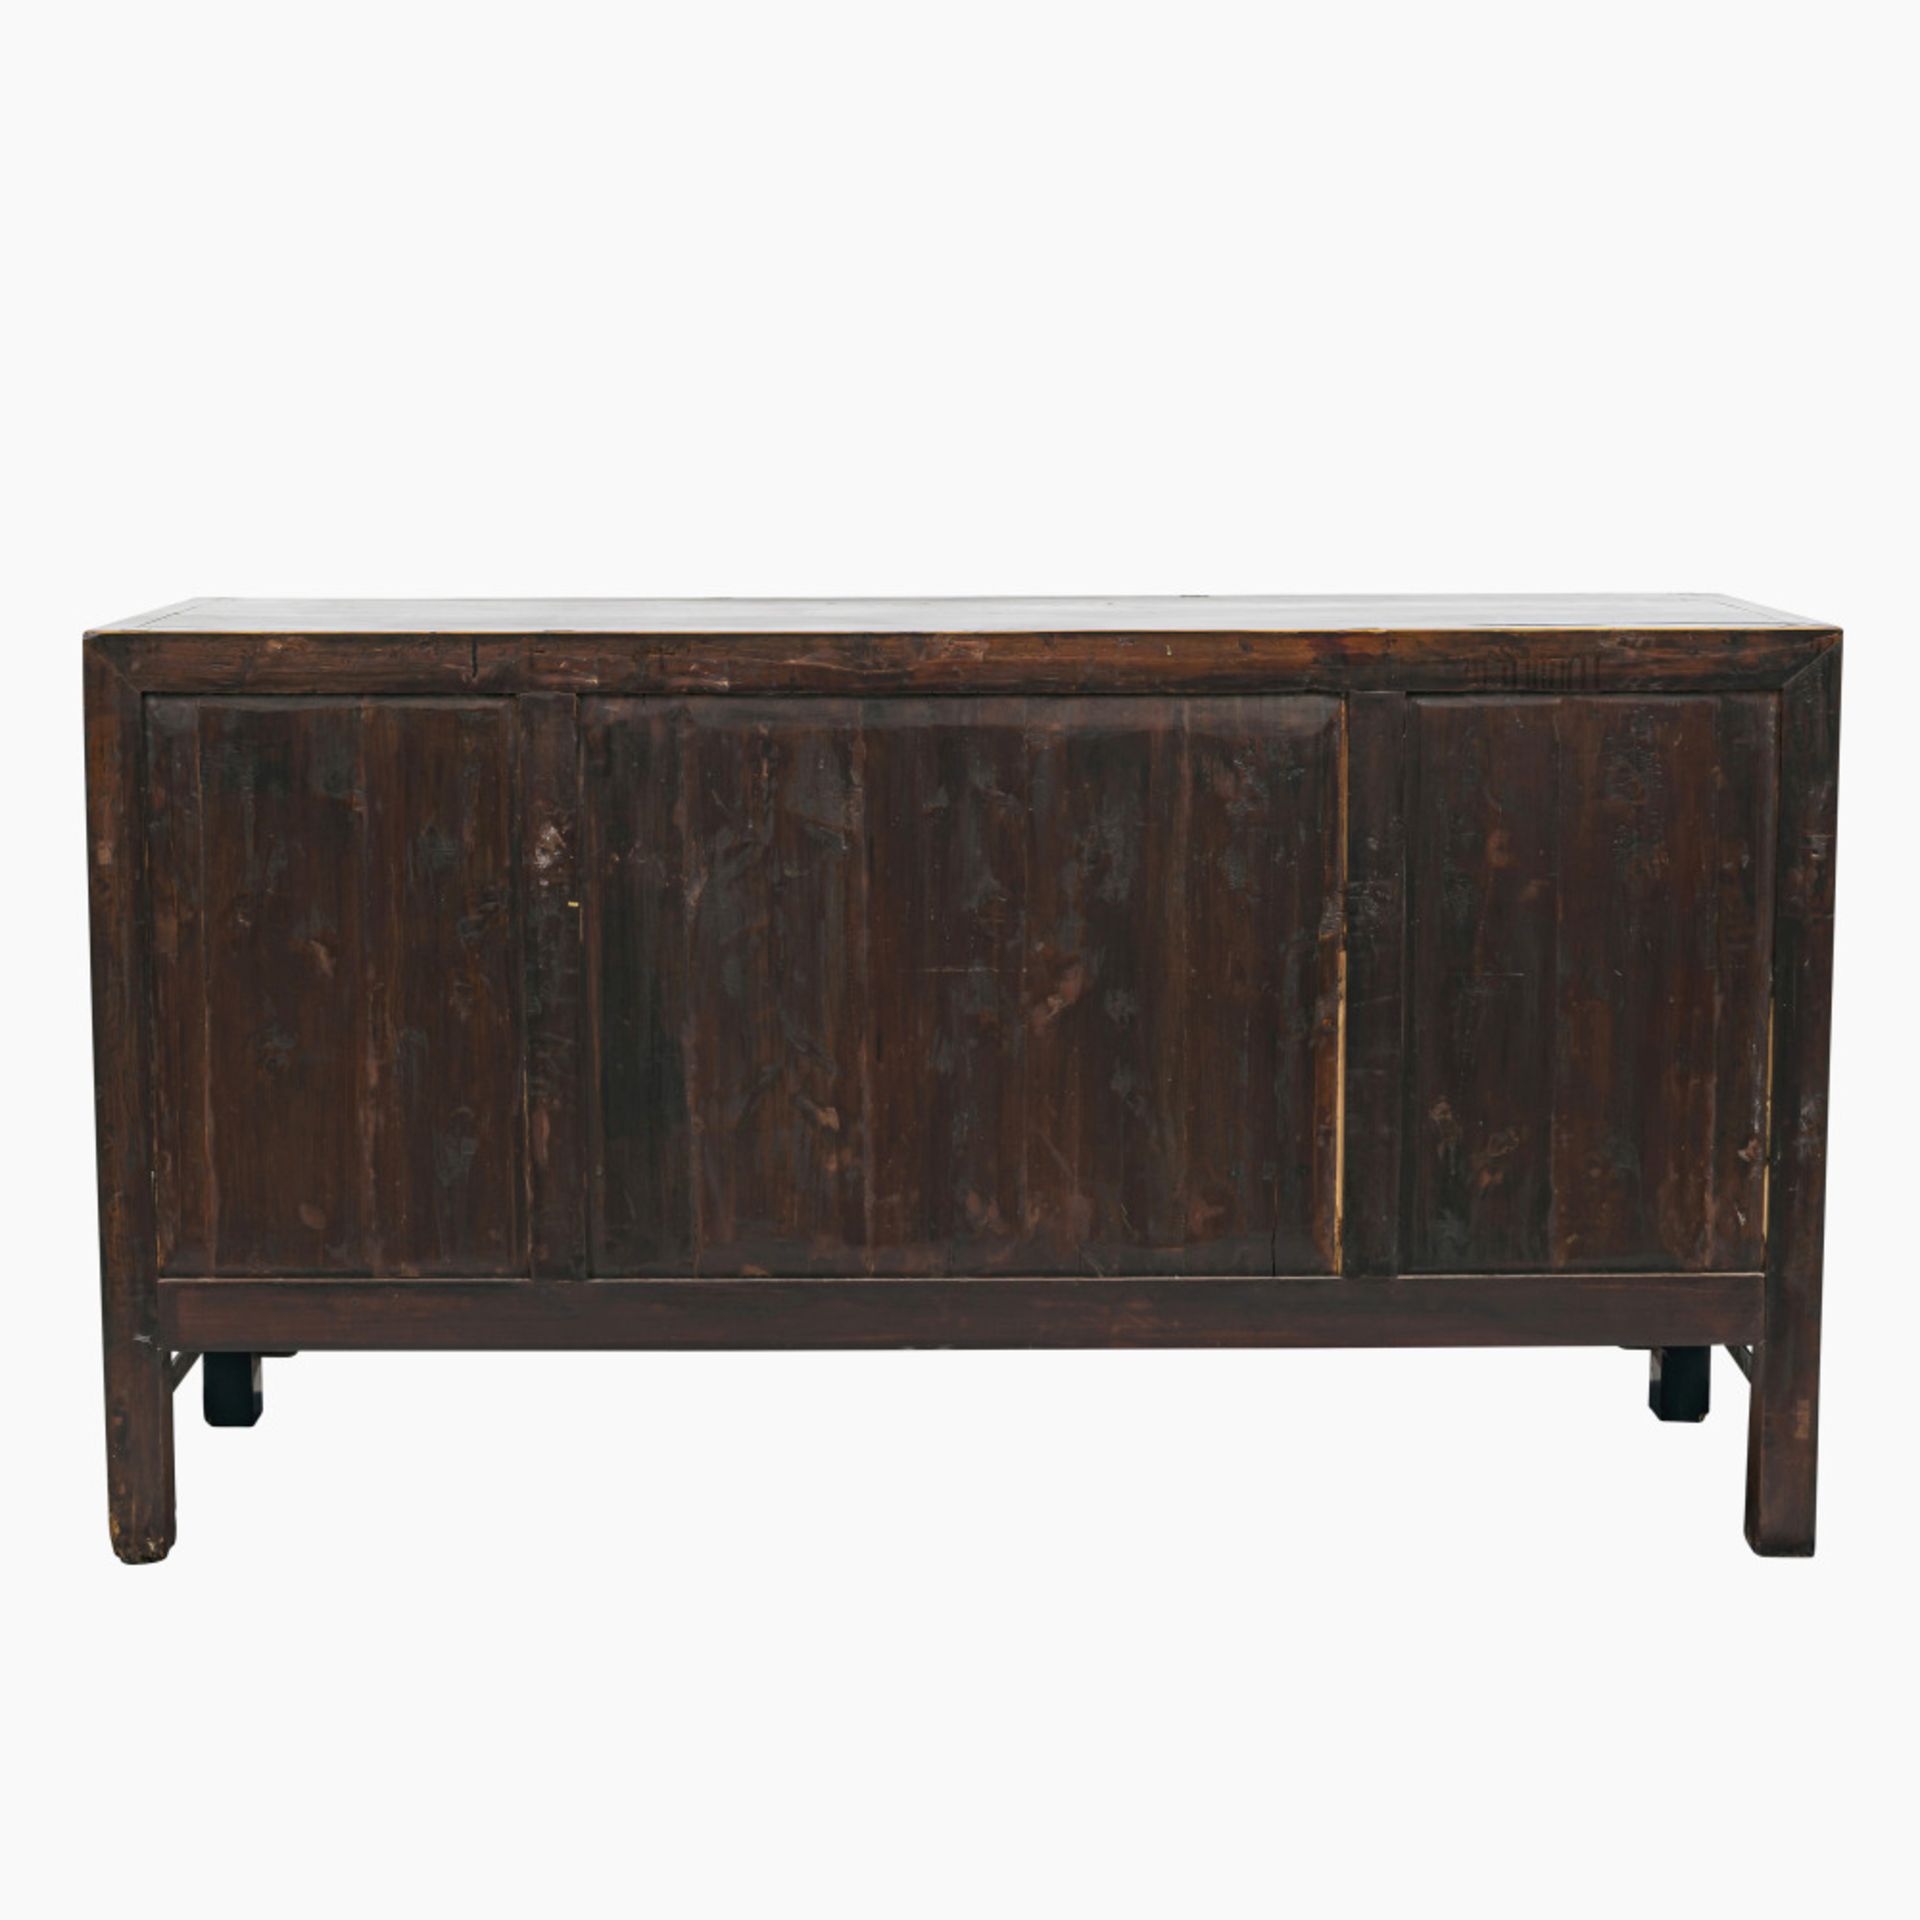 A sideboard - Chinese style - Image 2 of 2